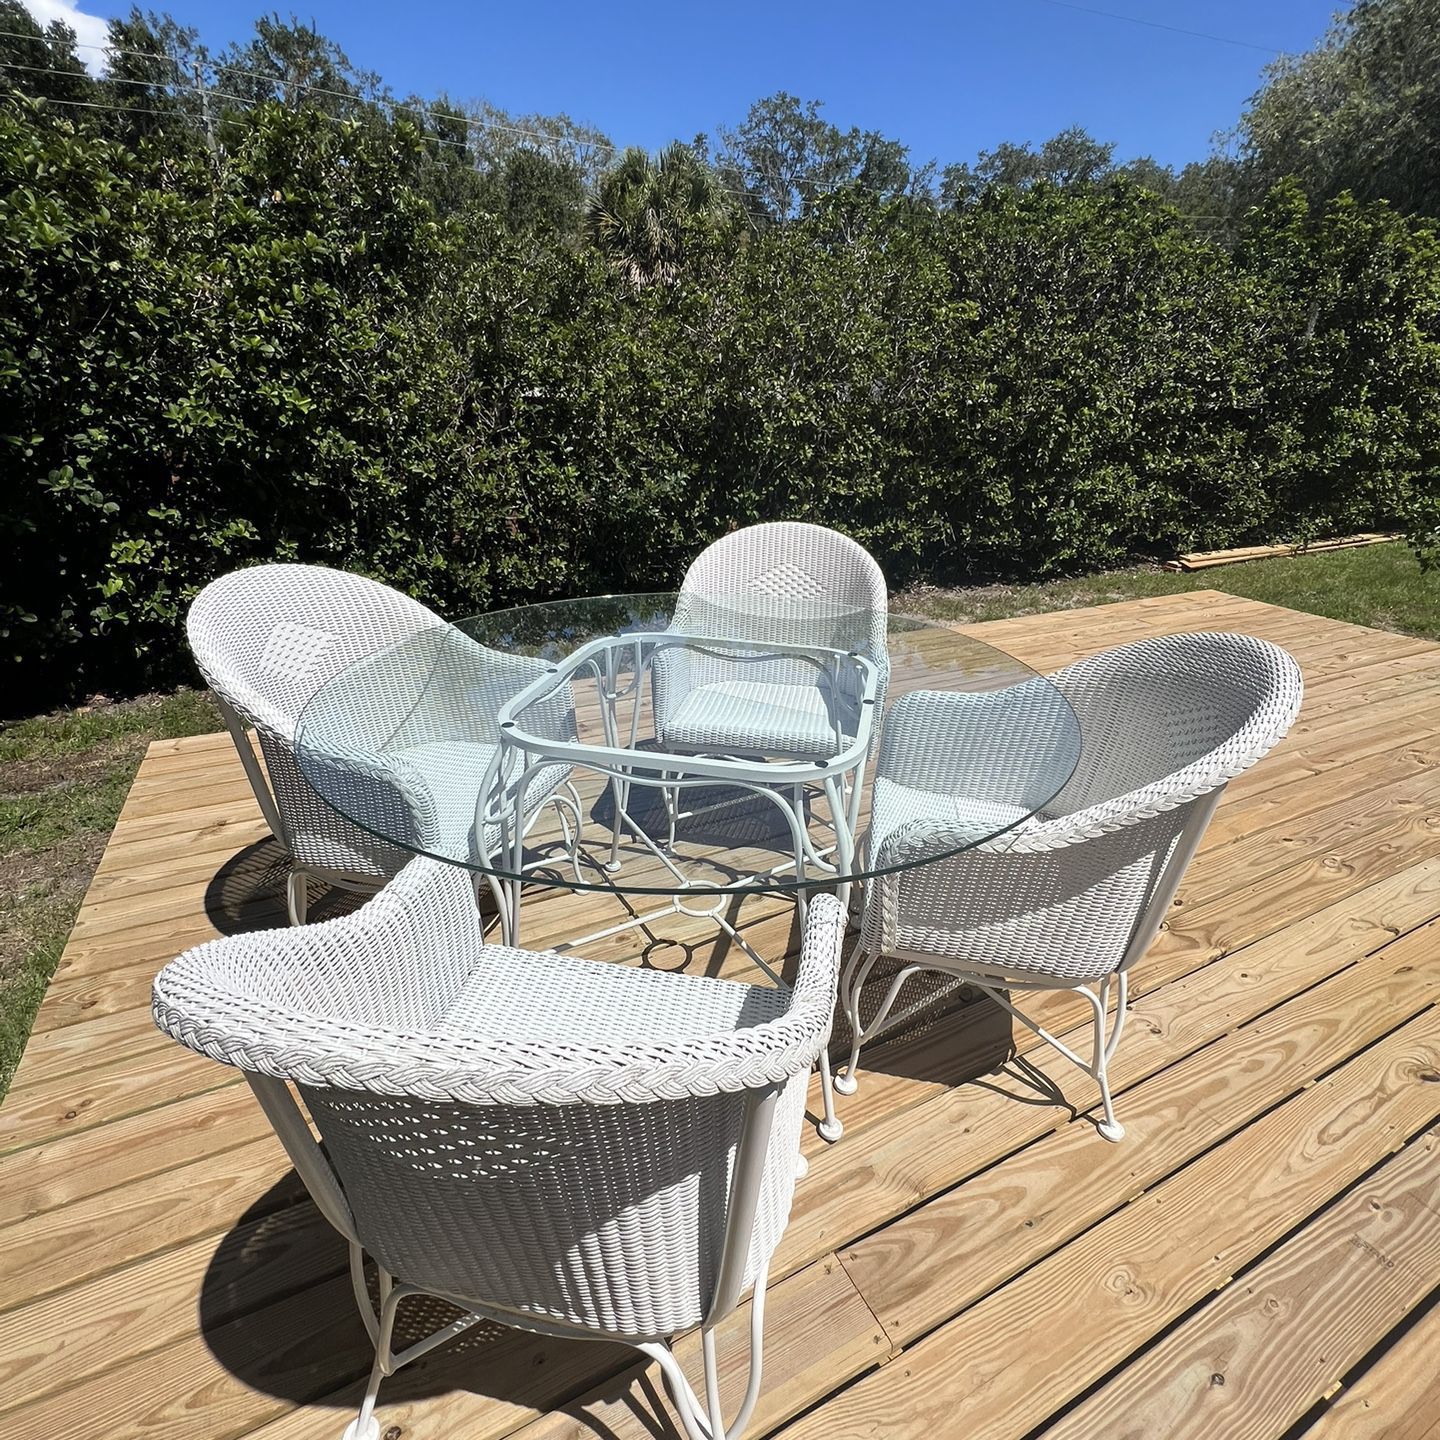 4 Person Patio Dining Set - Like New 